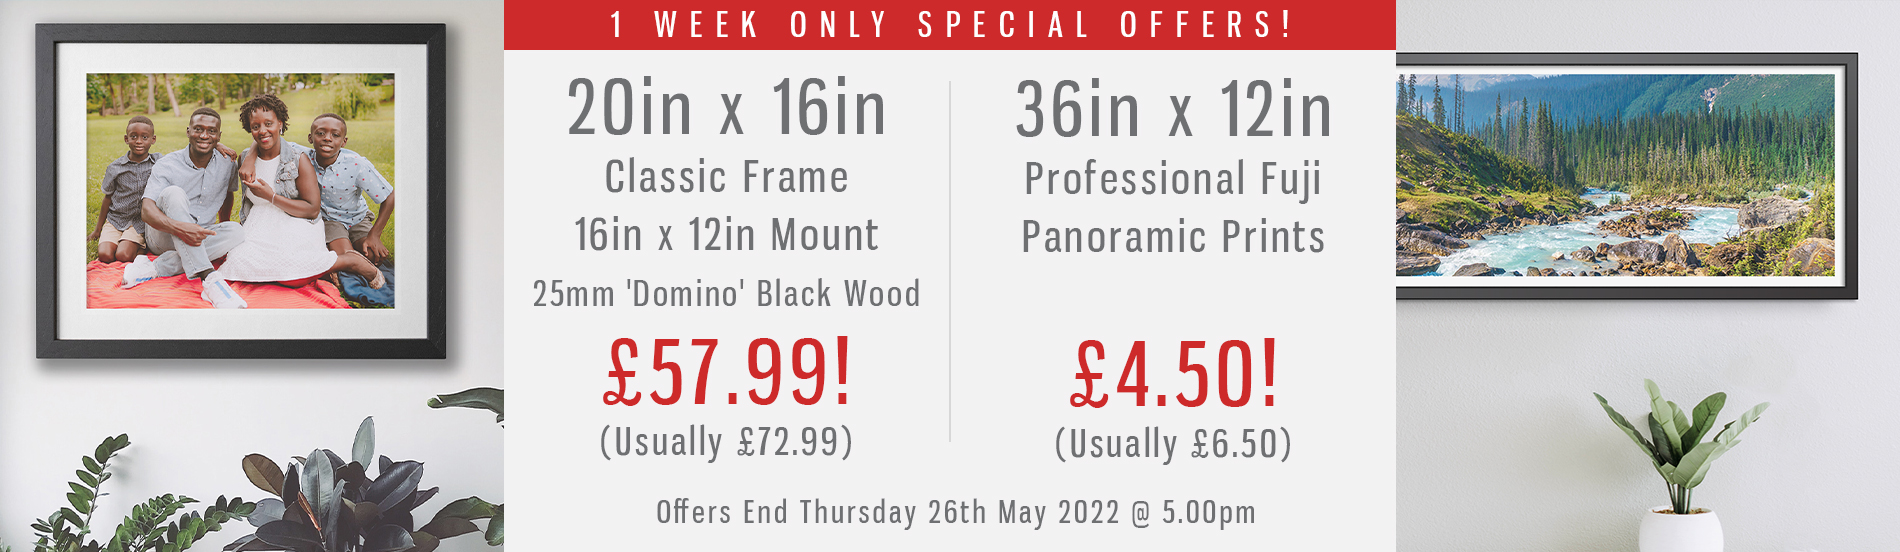 framing and panoramic print special offer banner